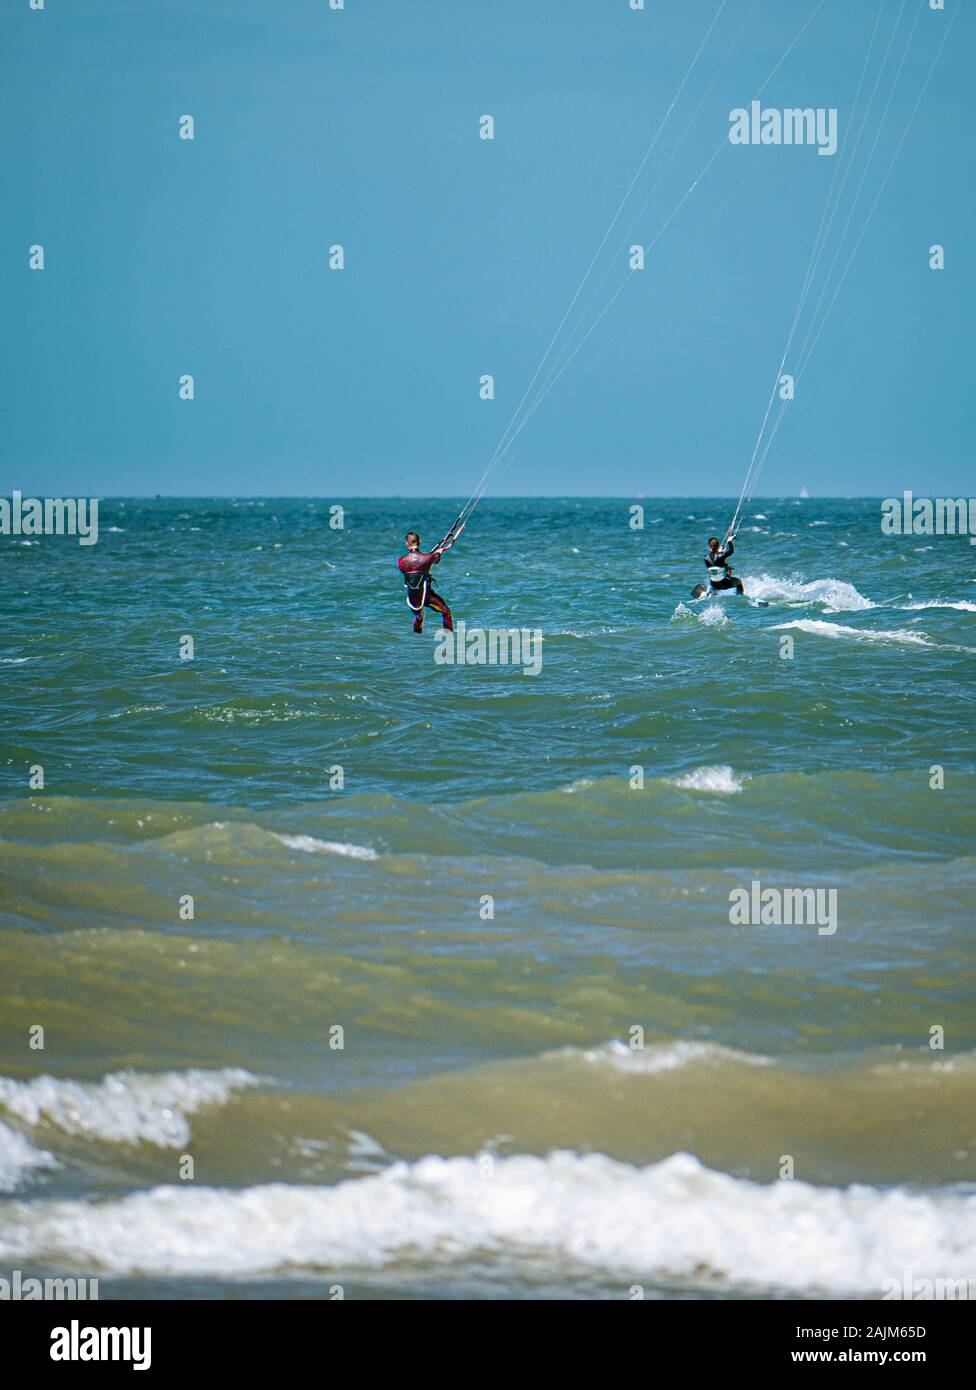 Two Kite Surfer from behind heading towards open seas Stock Photo